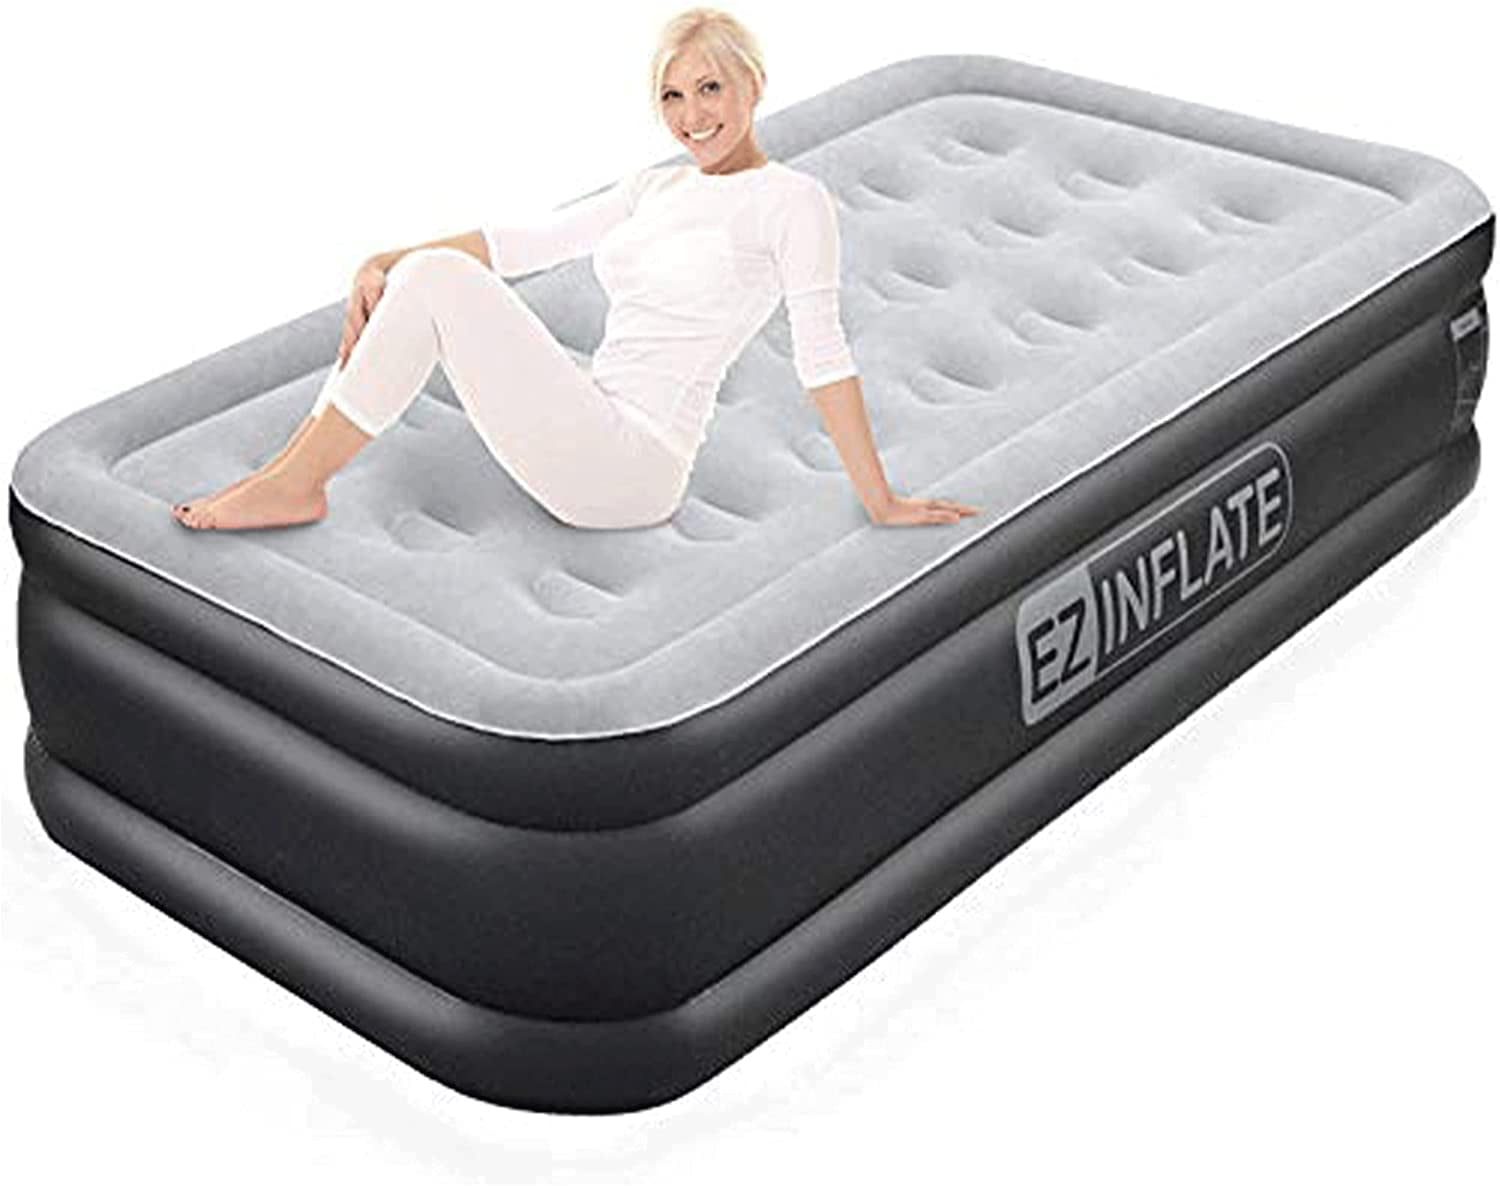 Details about   EZ INFLATE Luxury Double High Queen air Mattress with Built in Pump Queen Size, 